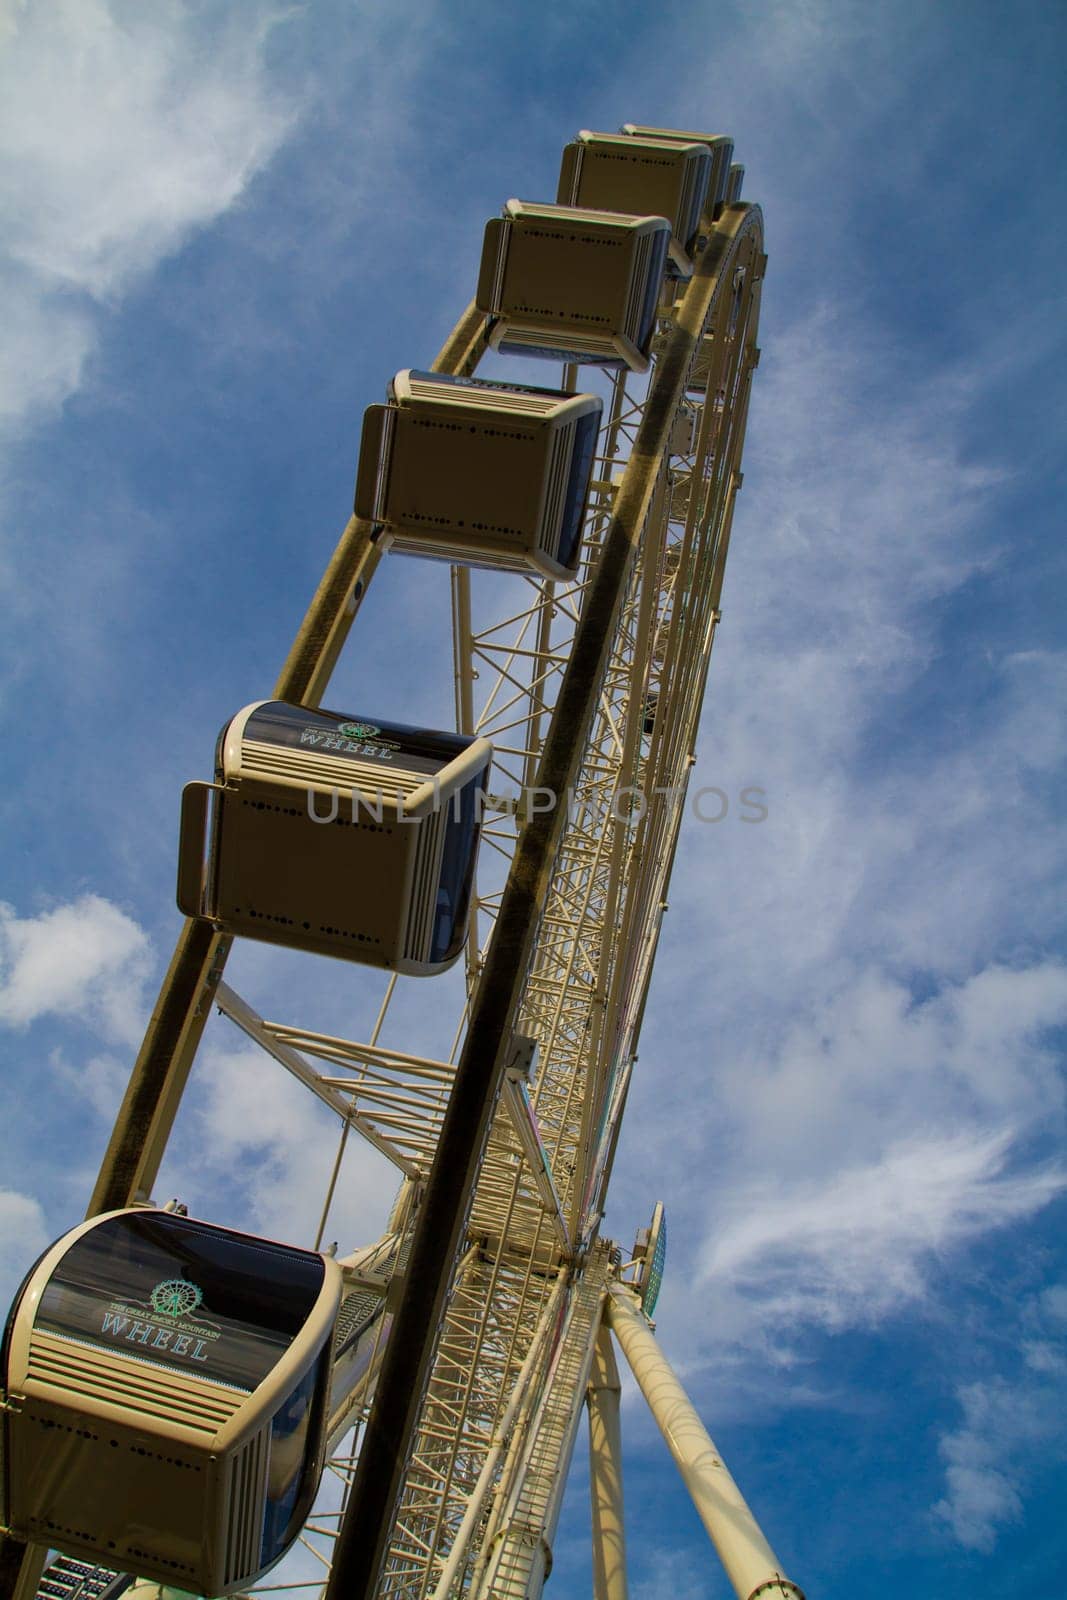 Enjoy the thrill of the towering Ferris wheel against a picturesque sky in Gatlinburg, Tennessee. This modern urban attraction offers panoramic views from its enclosed gondolas, providing the perfect backdrop for a joyful day of entertainment.